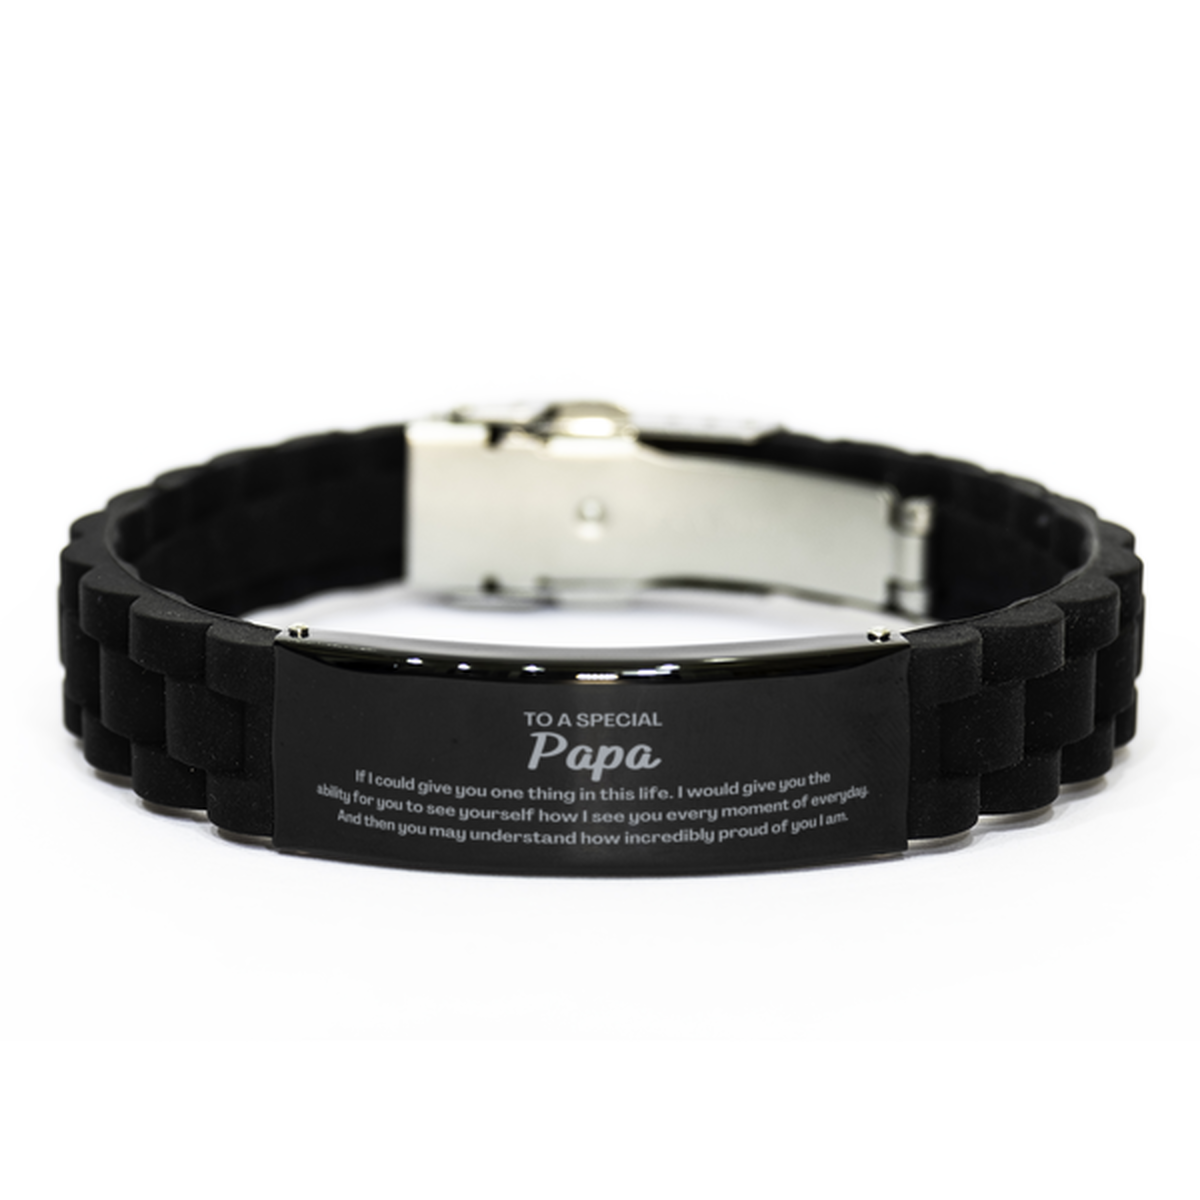 To My Papa Black Glidelock Clasp Bracelet, Gifts For Papa Engraved, Inspirational Gifts for Christmas Birthday, Epic Gifts for Papa To A Special Papa how incredibly proud of you I am